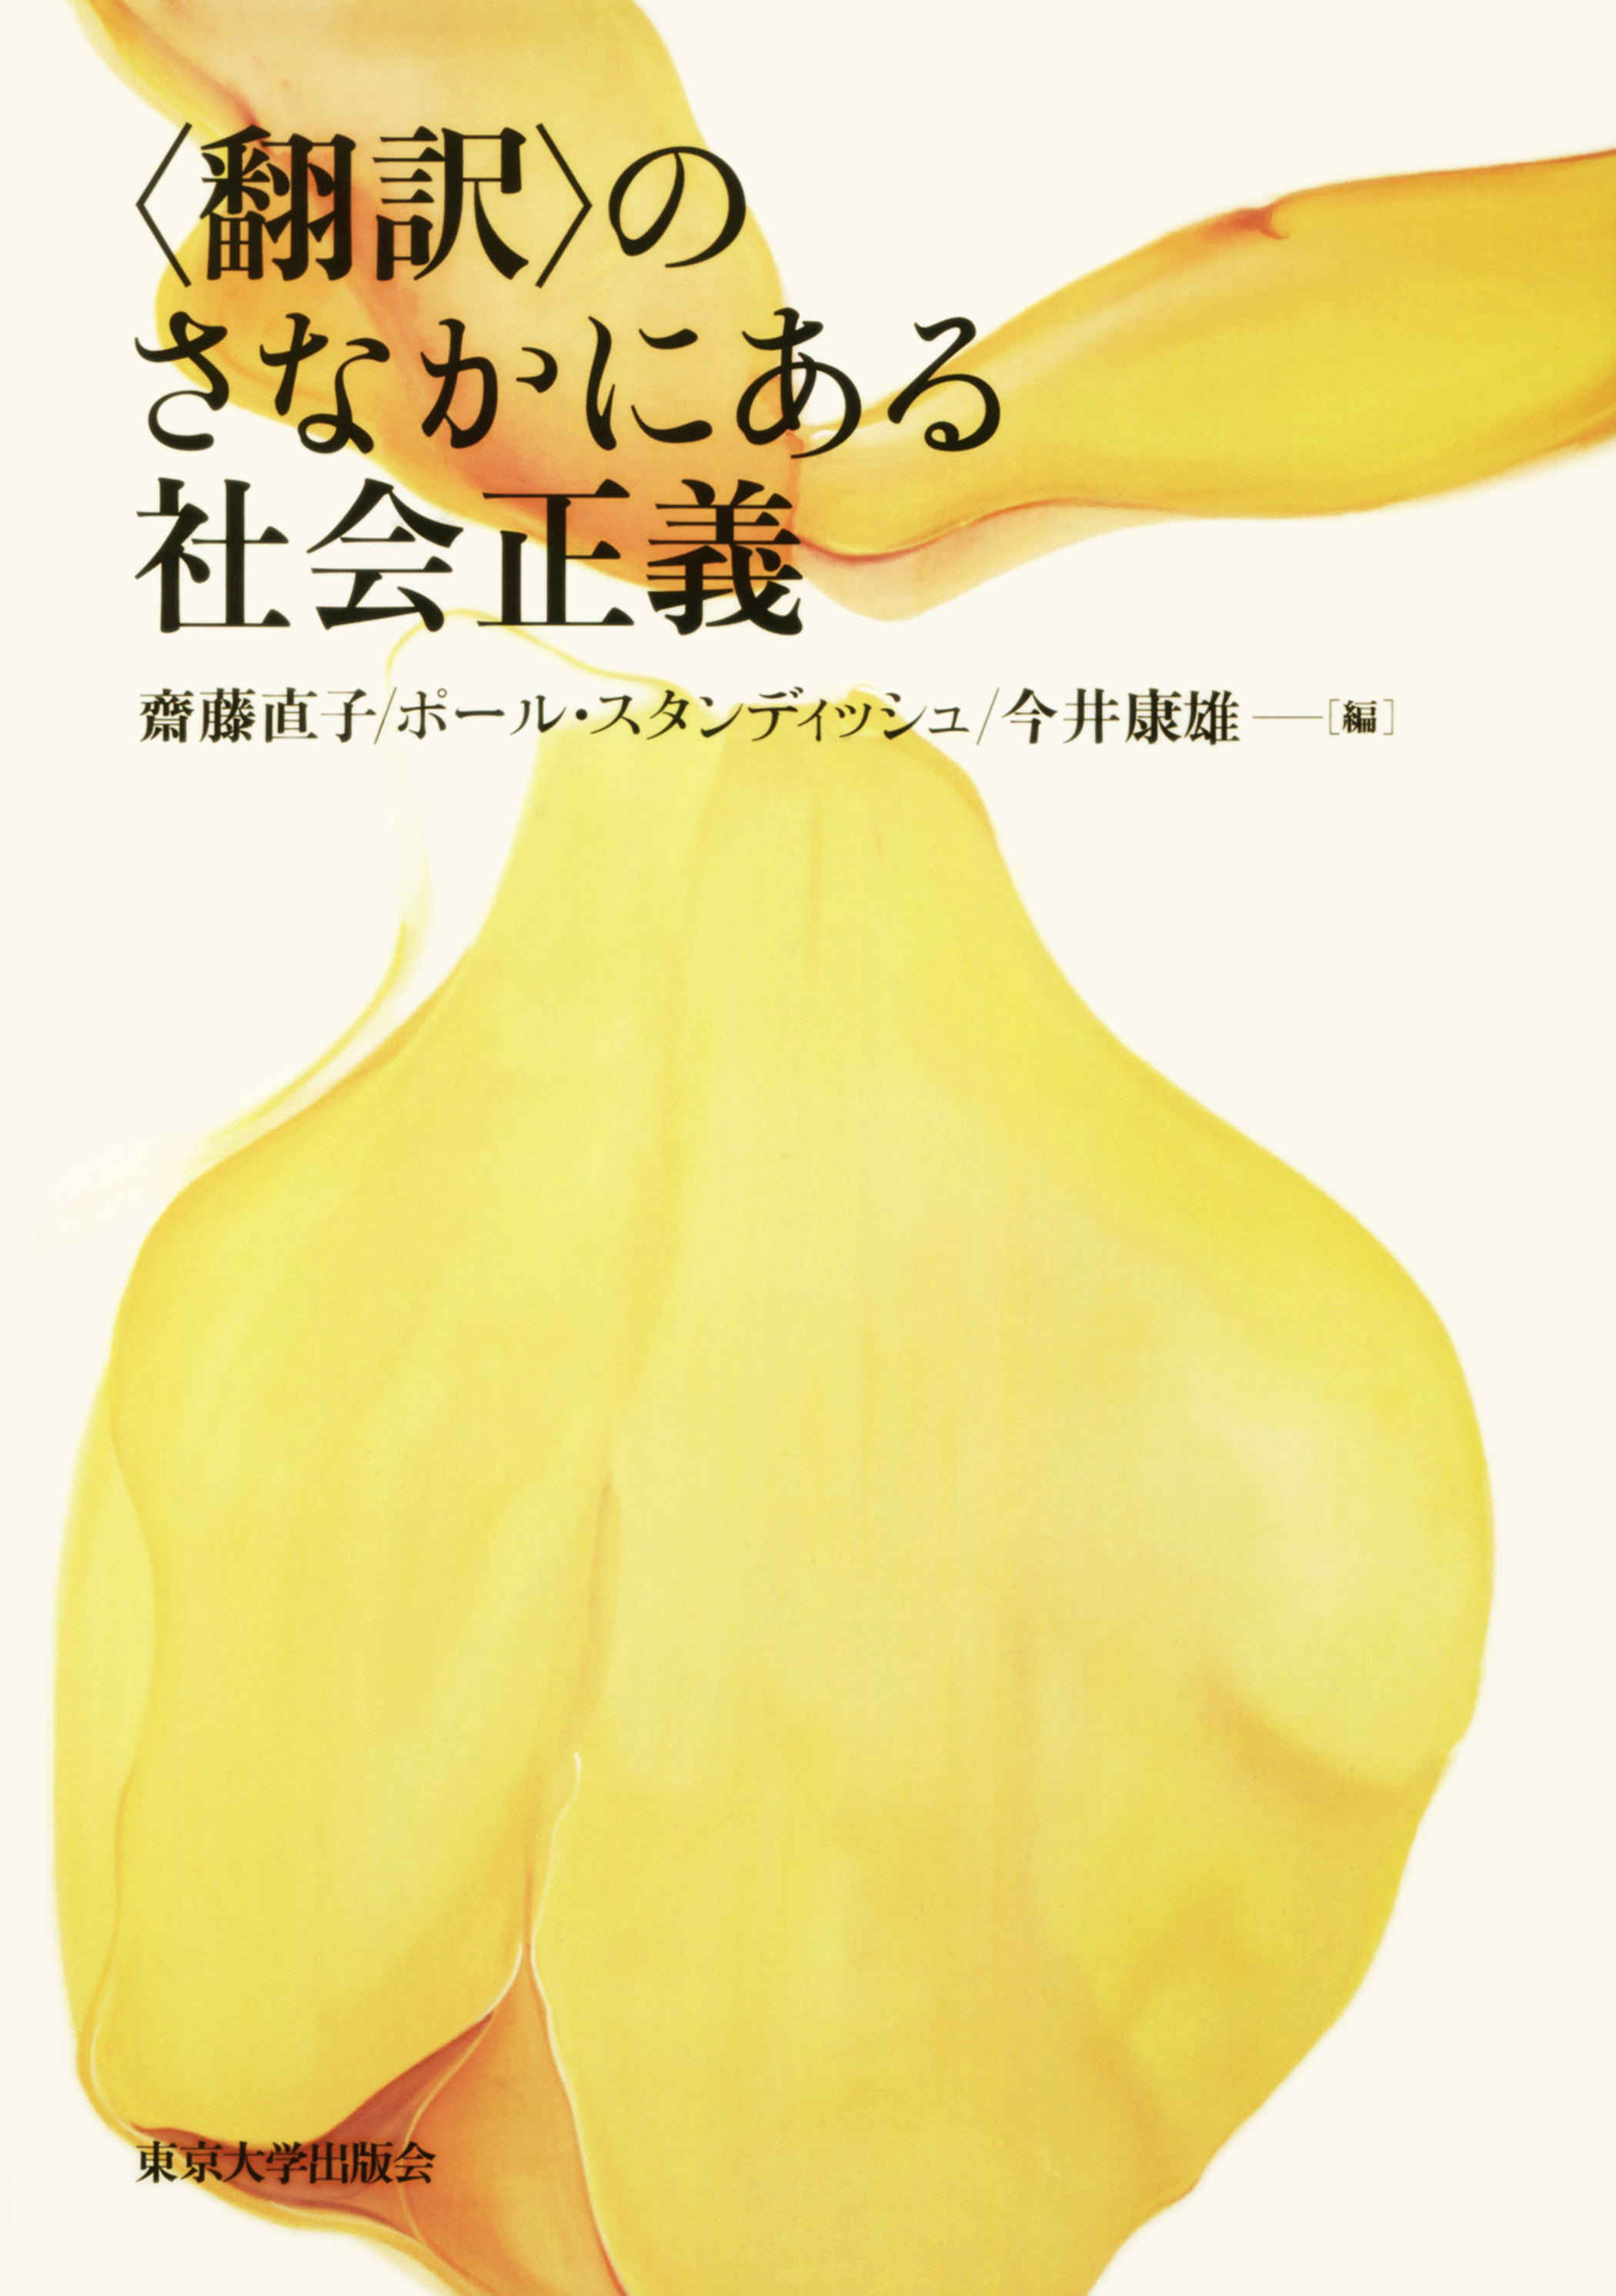 an illustration of yellow flower